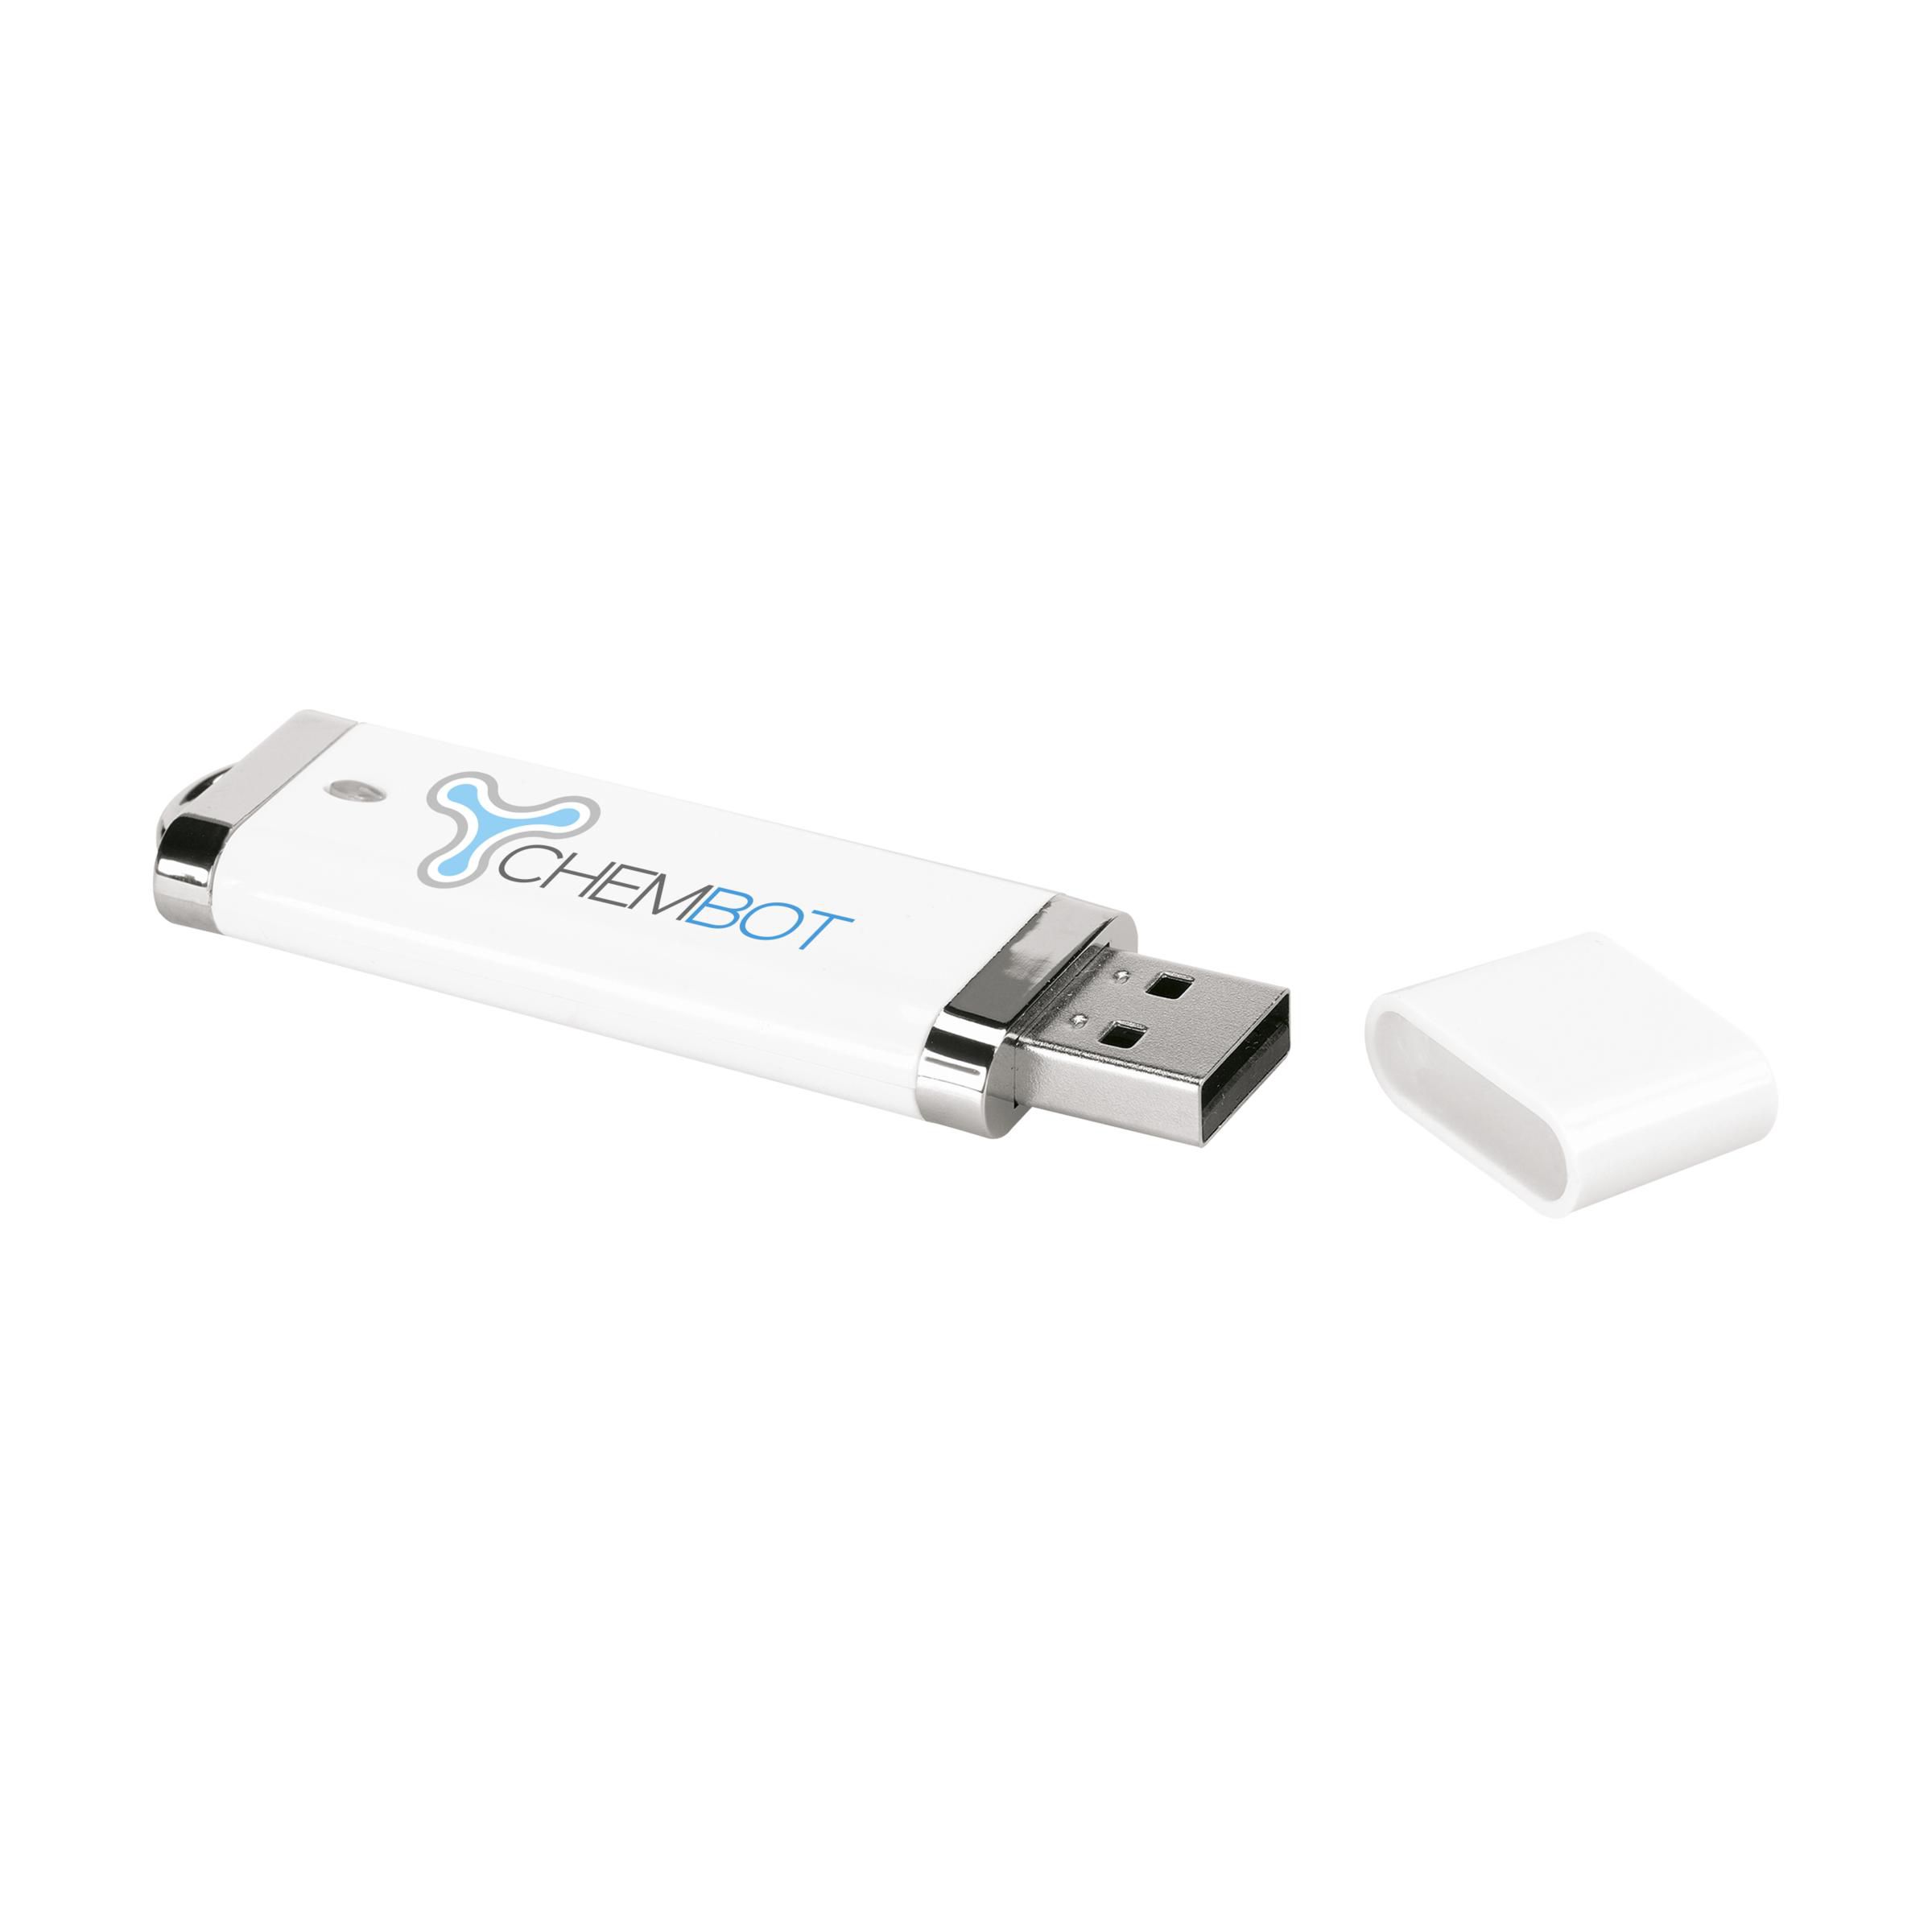 A USB stick (2.0) designed to safely and conveniently store and transport files. Thanks to the practical 'Plug-and-Play' system, it's ready for immediate use. Compatible with Windows, Mac, and Linux. Each piece is individually packed in a standard cardboard box. The price includes a one-colour imprint on one side of the product. Available in any PMS colour from a minimum order quantity of 100 pieces - Little Snoring - Thanington